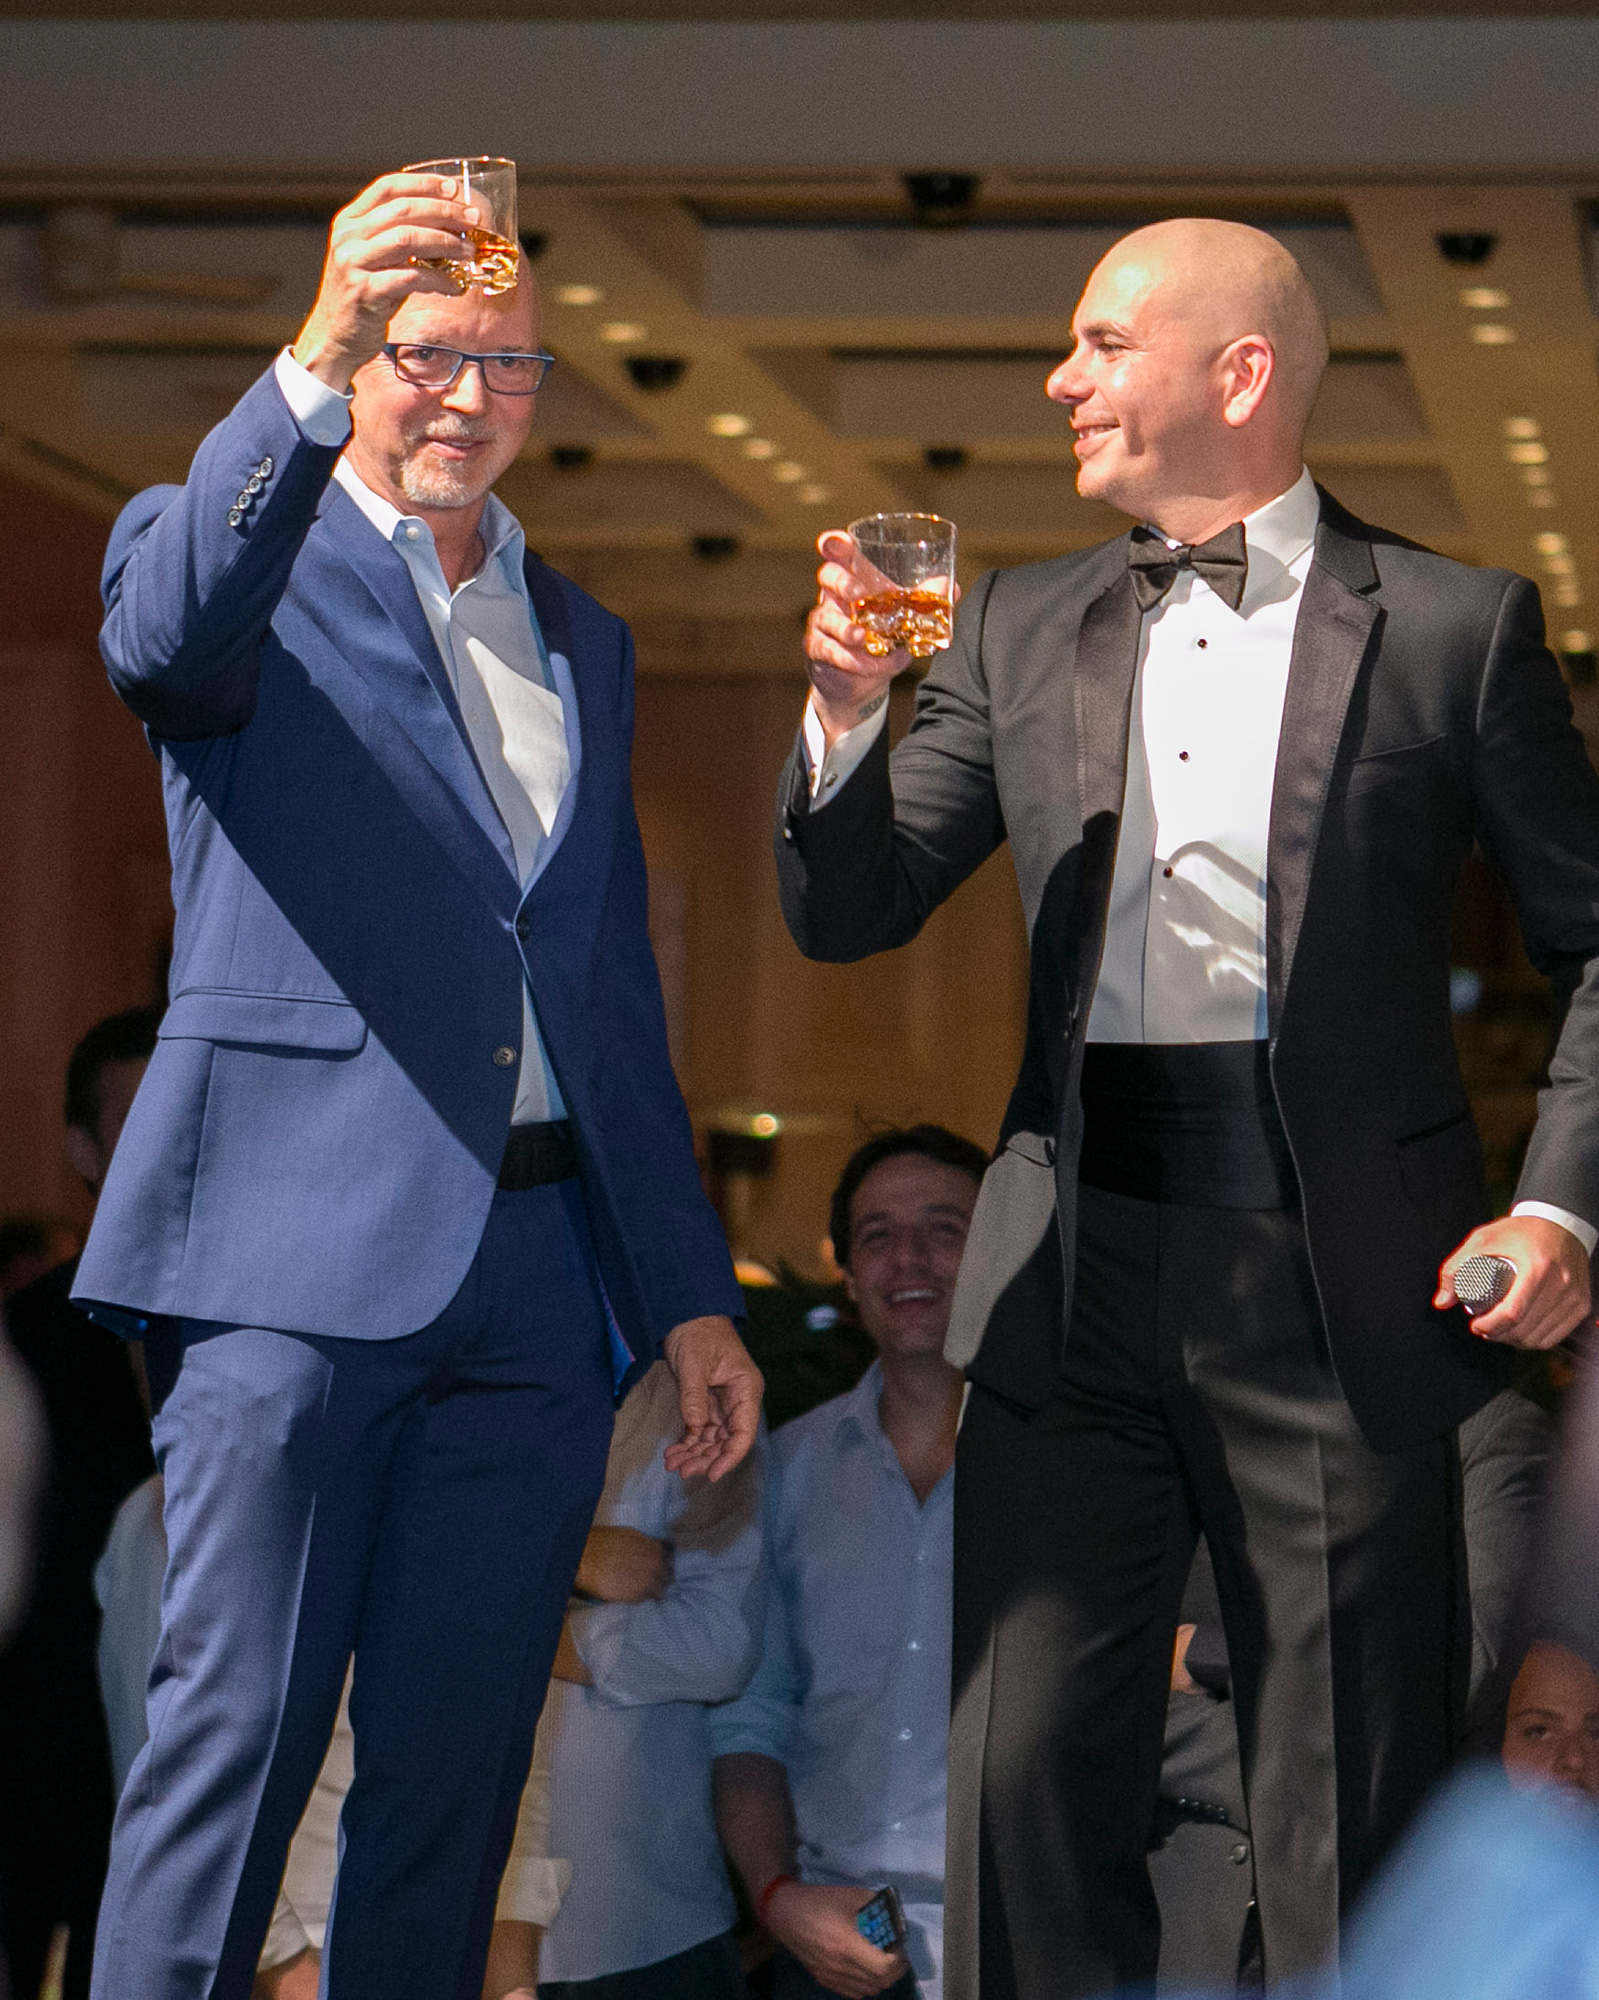 Bally Technologies CEO Richard Haddrill and Pitbull – Playboy’s brand ambassador – celebrate during a Global Gaming Expo private event to kick off Bally’s expanded relationship with Playboy.